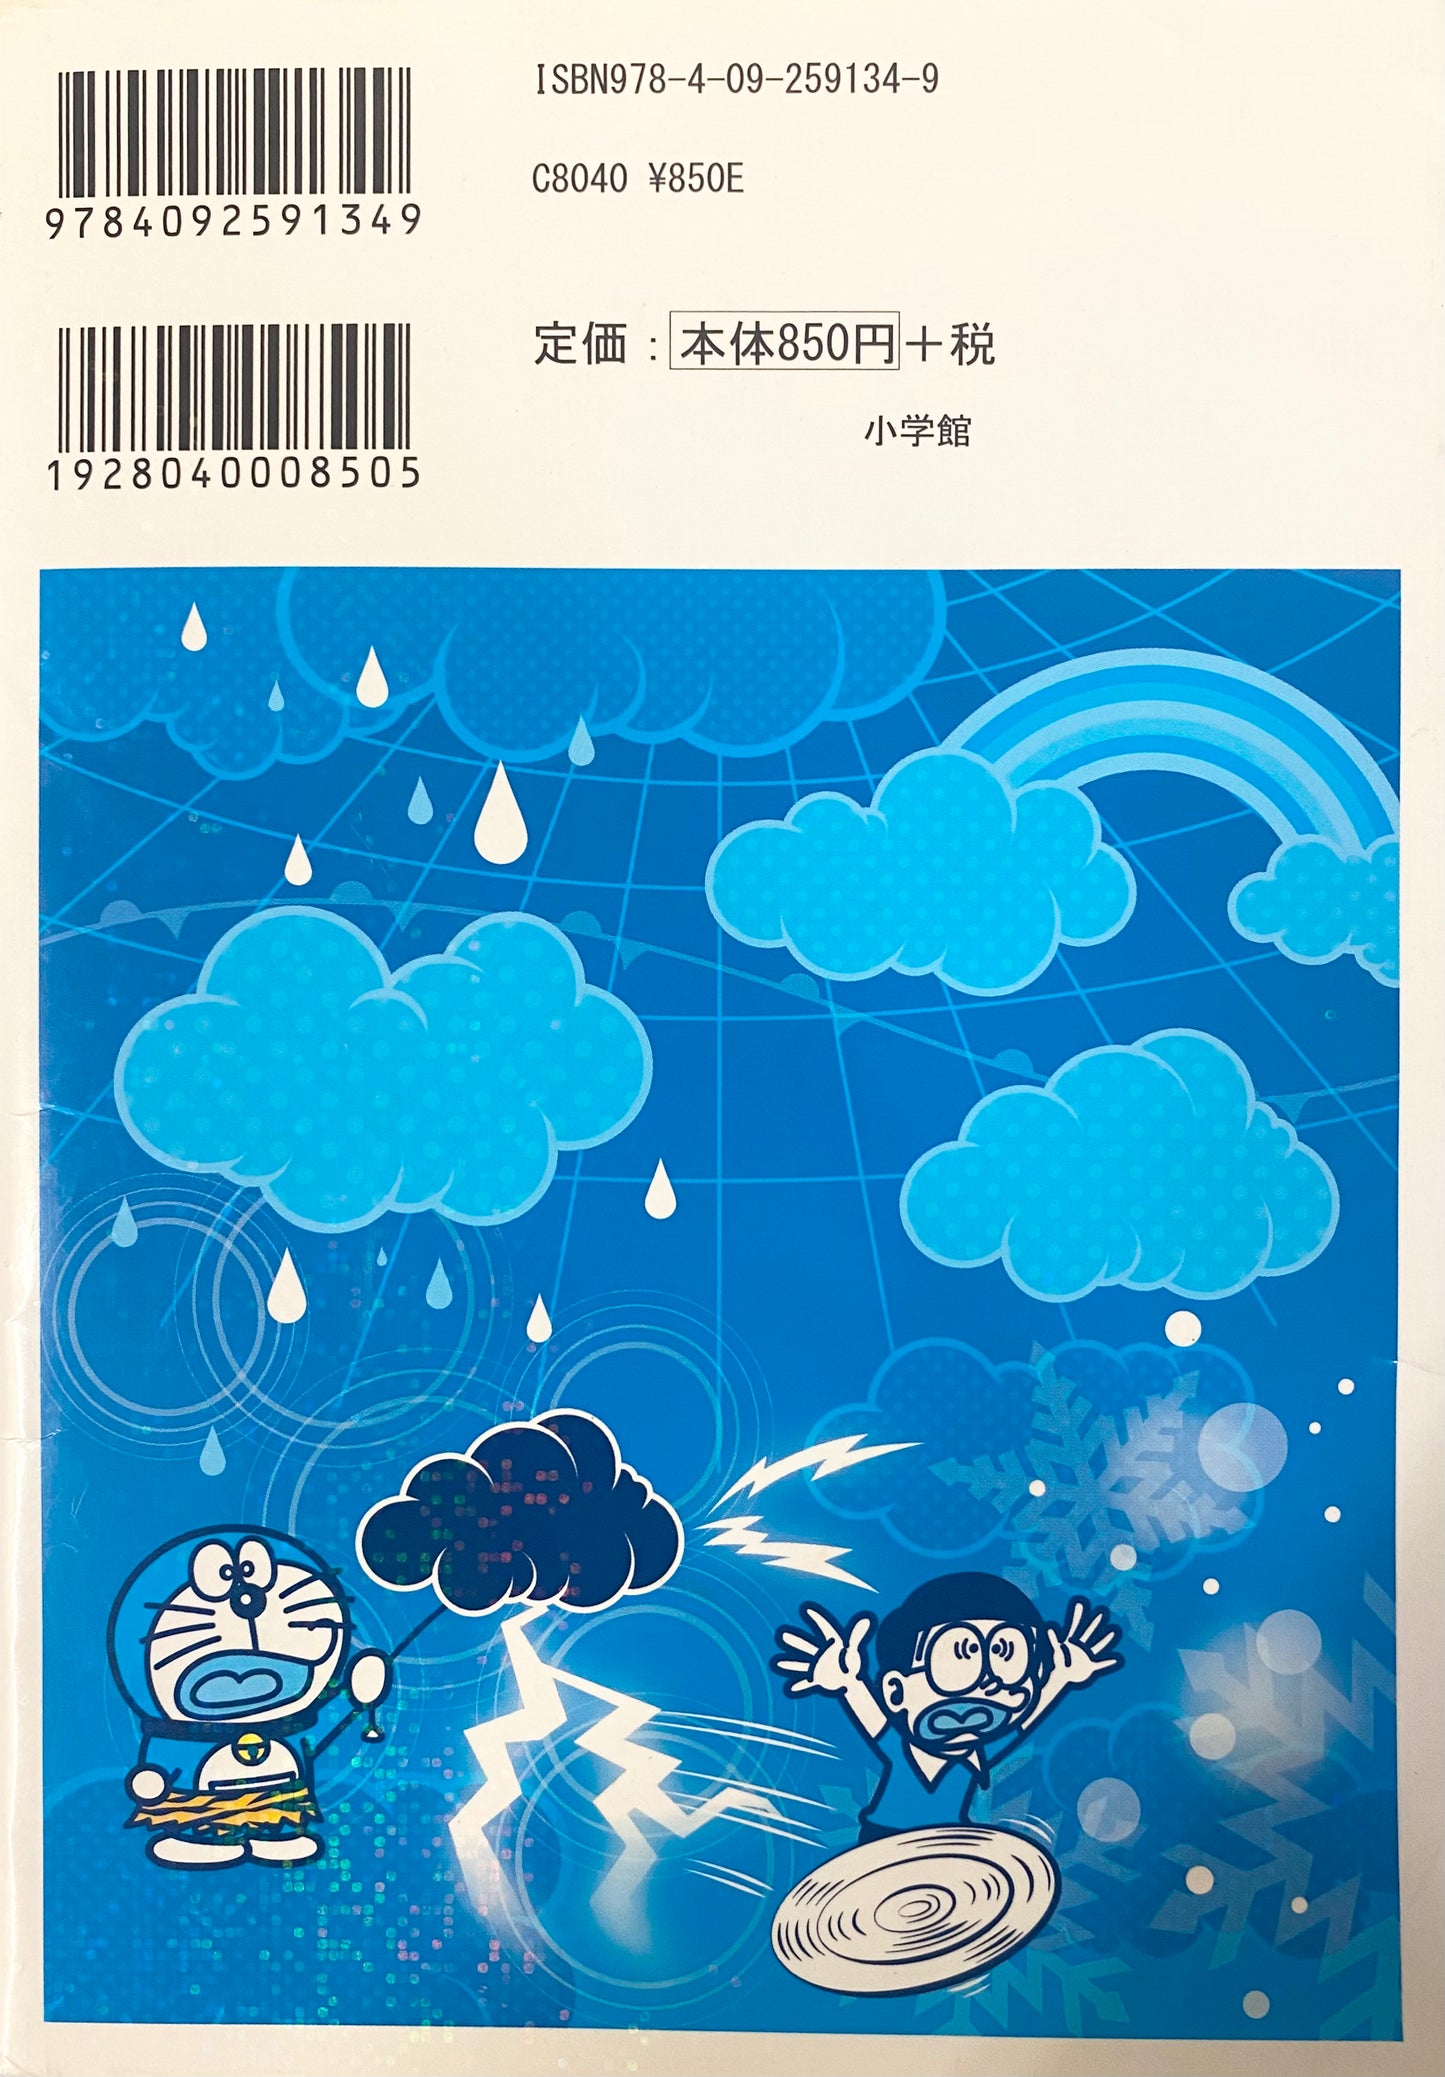 Doraemon Science World-Mysteries of weather and meteorology-Official Japanese Edition